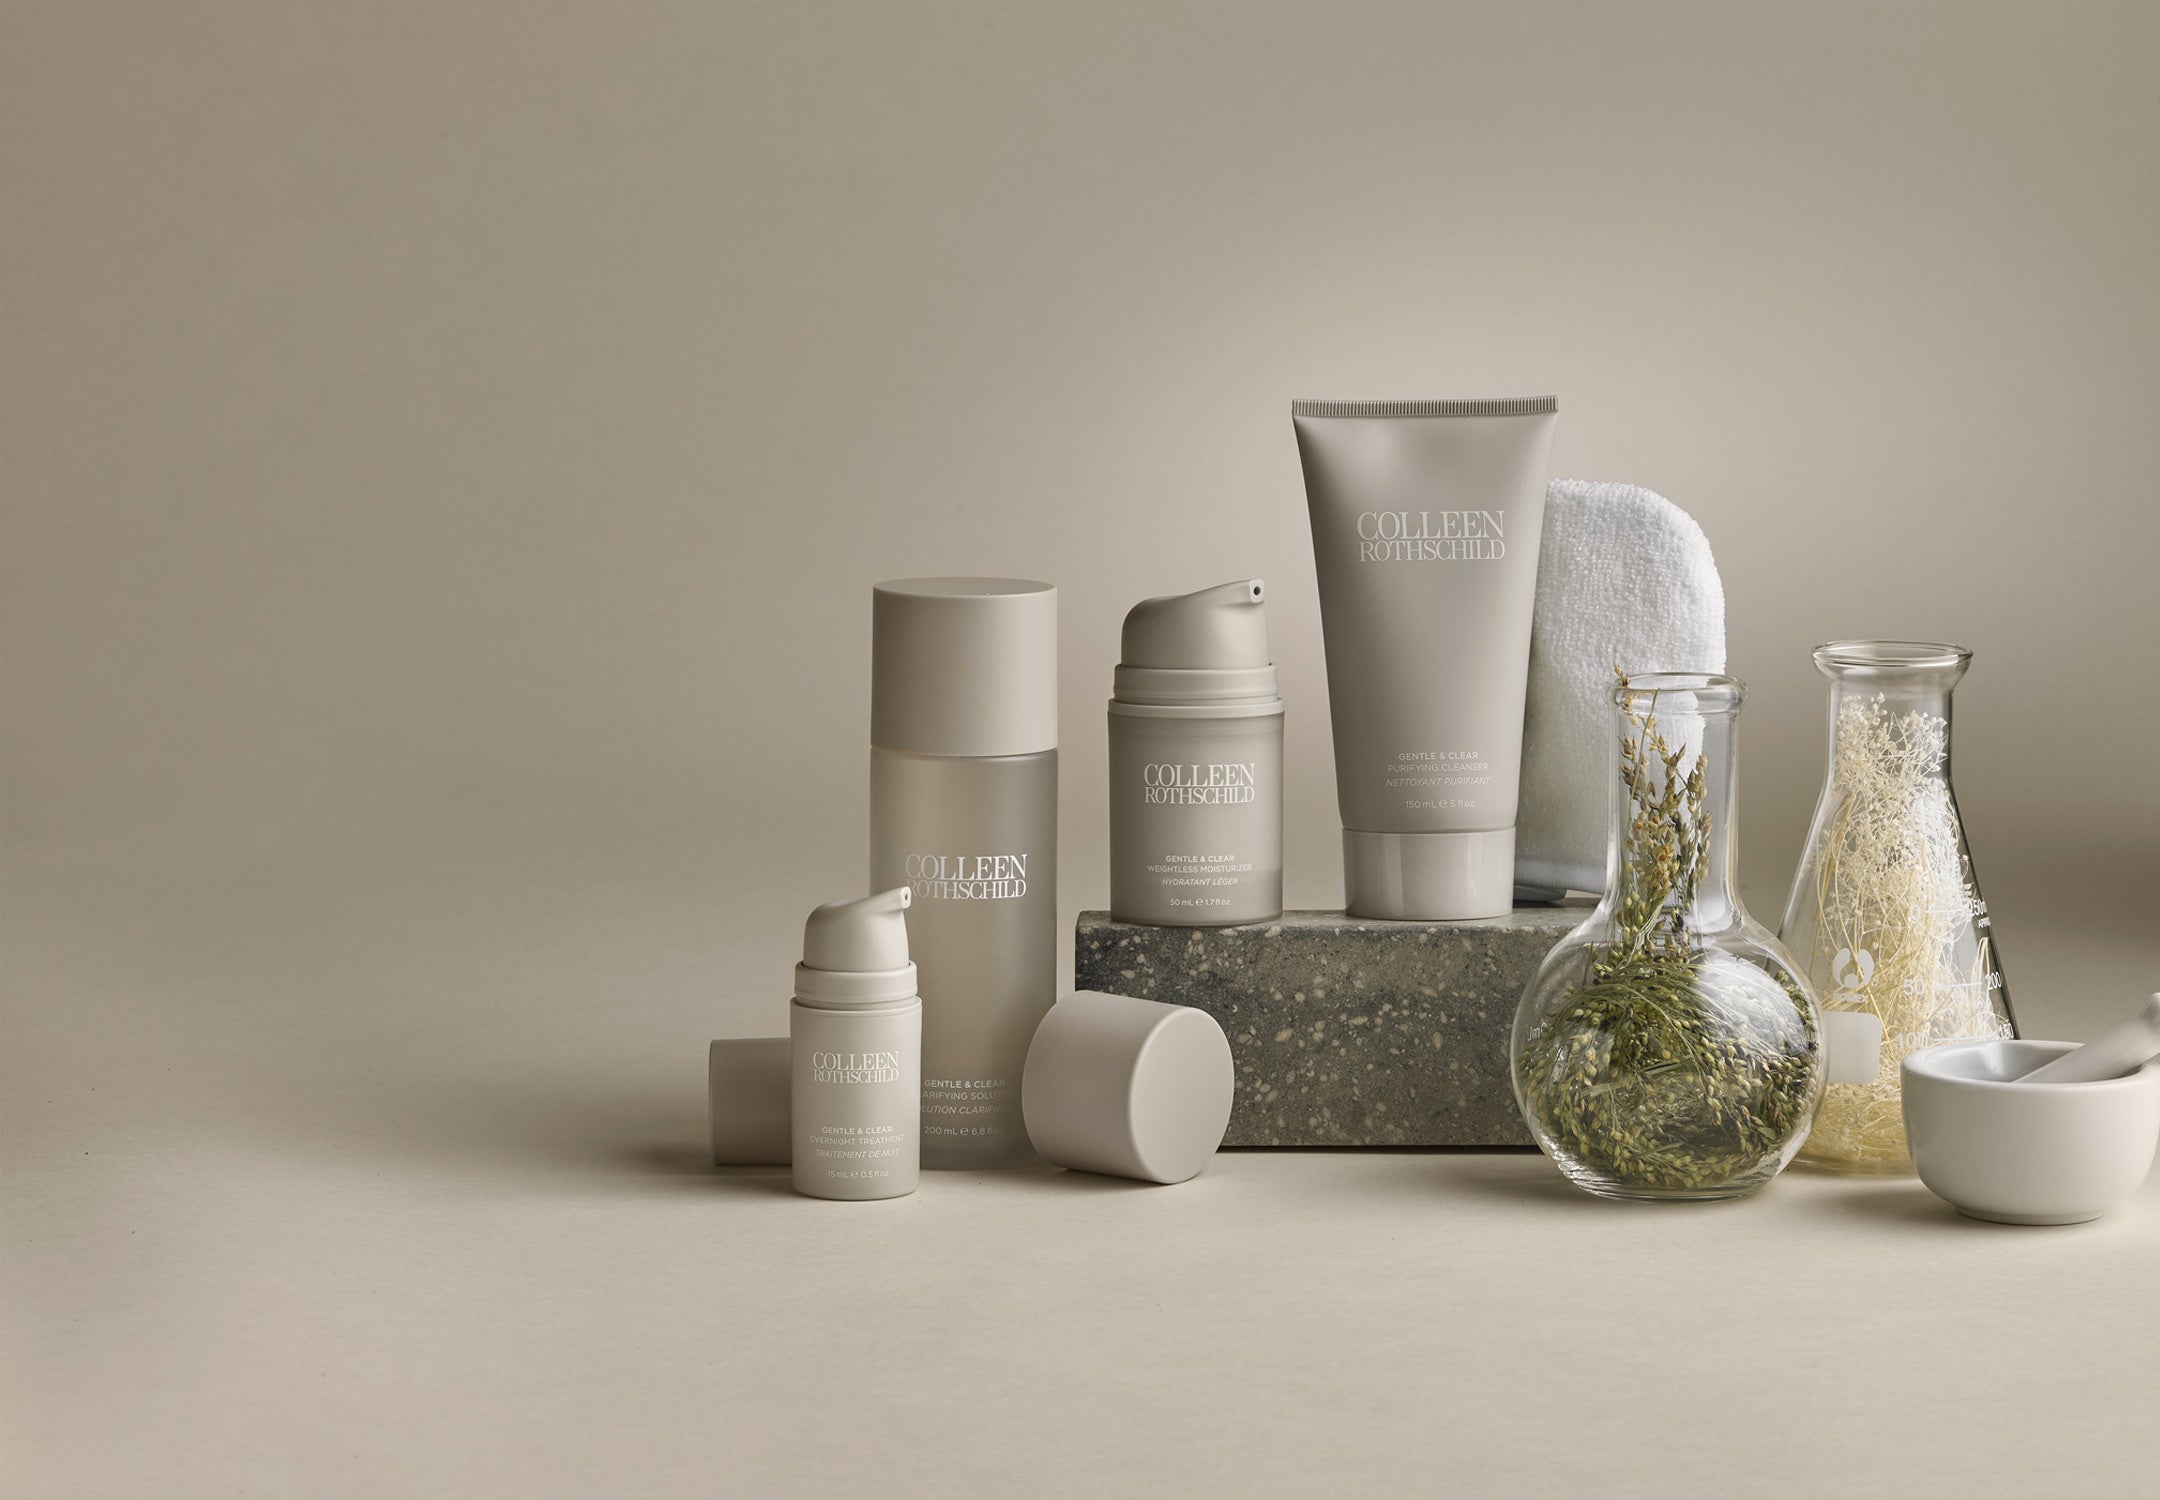 Colleen Rothschild Gentle & Clear products with beakers and botanics